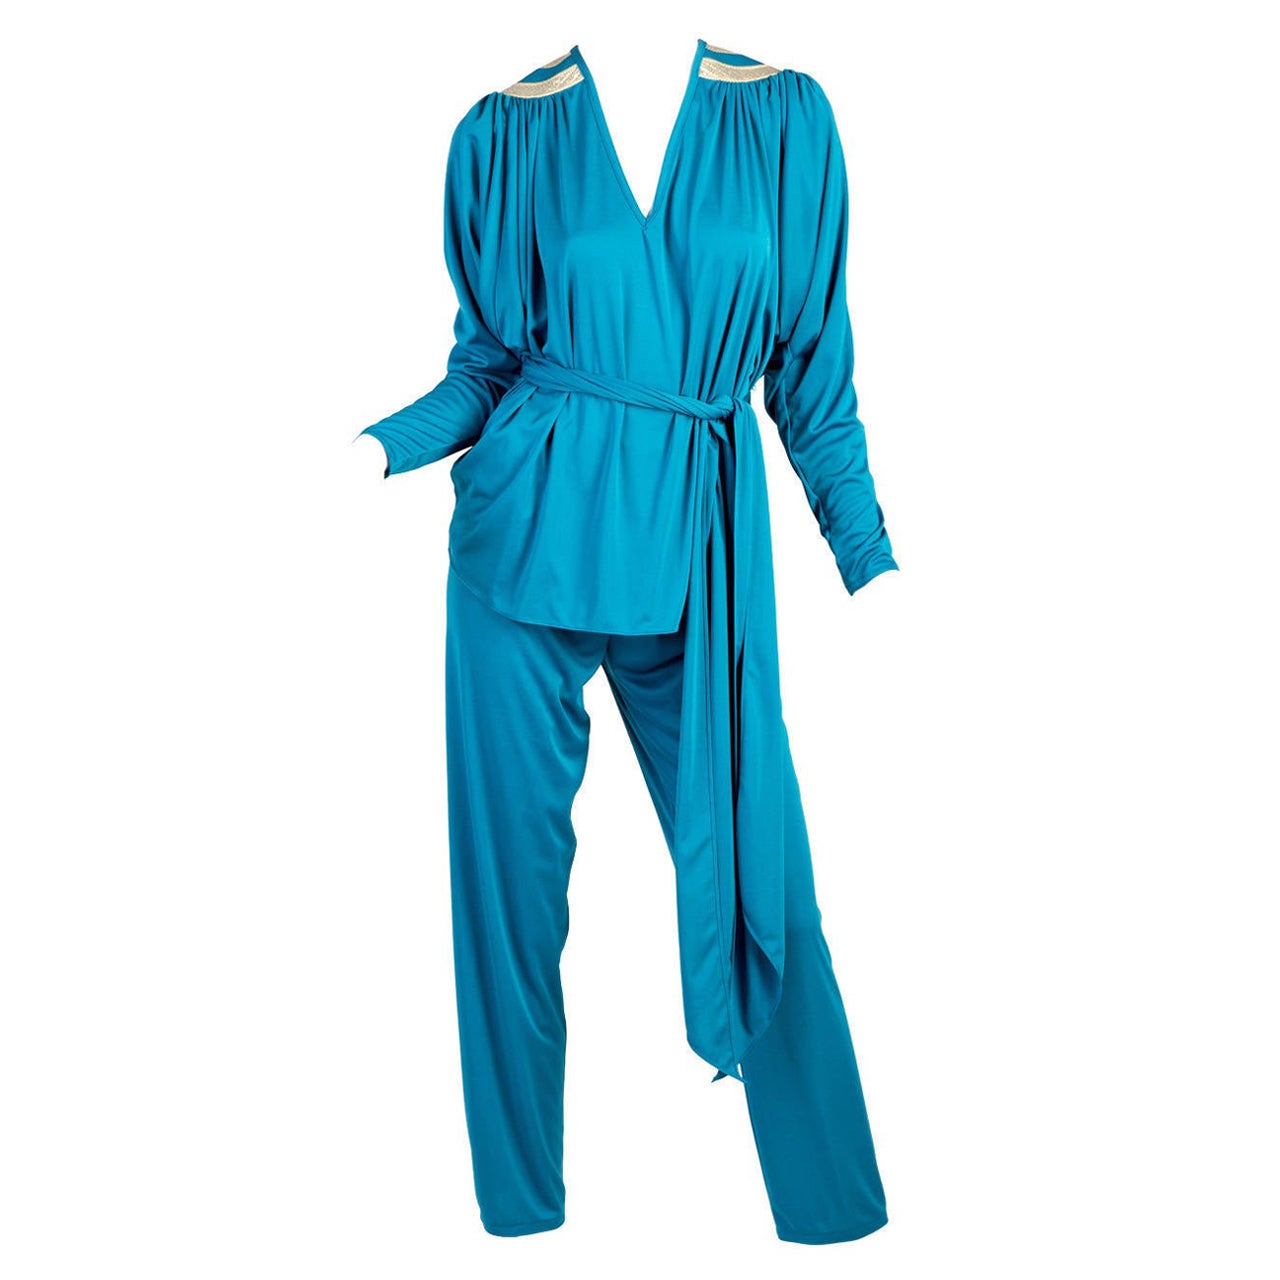 1970s Bill Tice Turquoise & Gold Gathered Jersey Dolman Sleeve Top & Pants Set  en vente